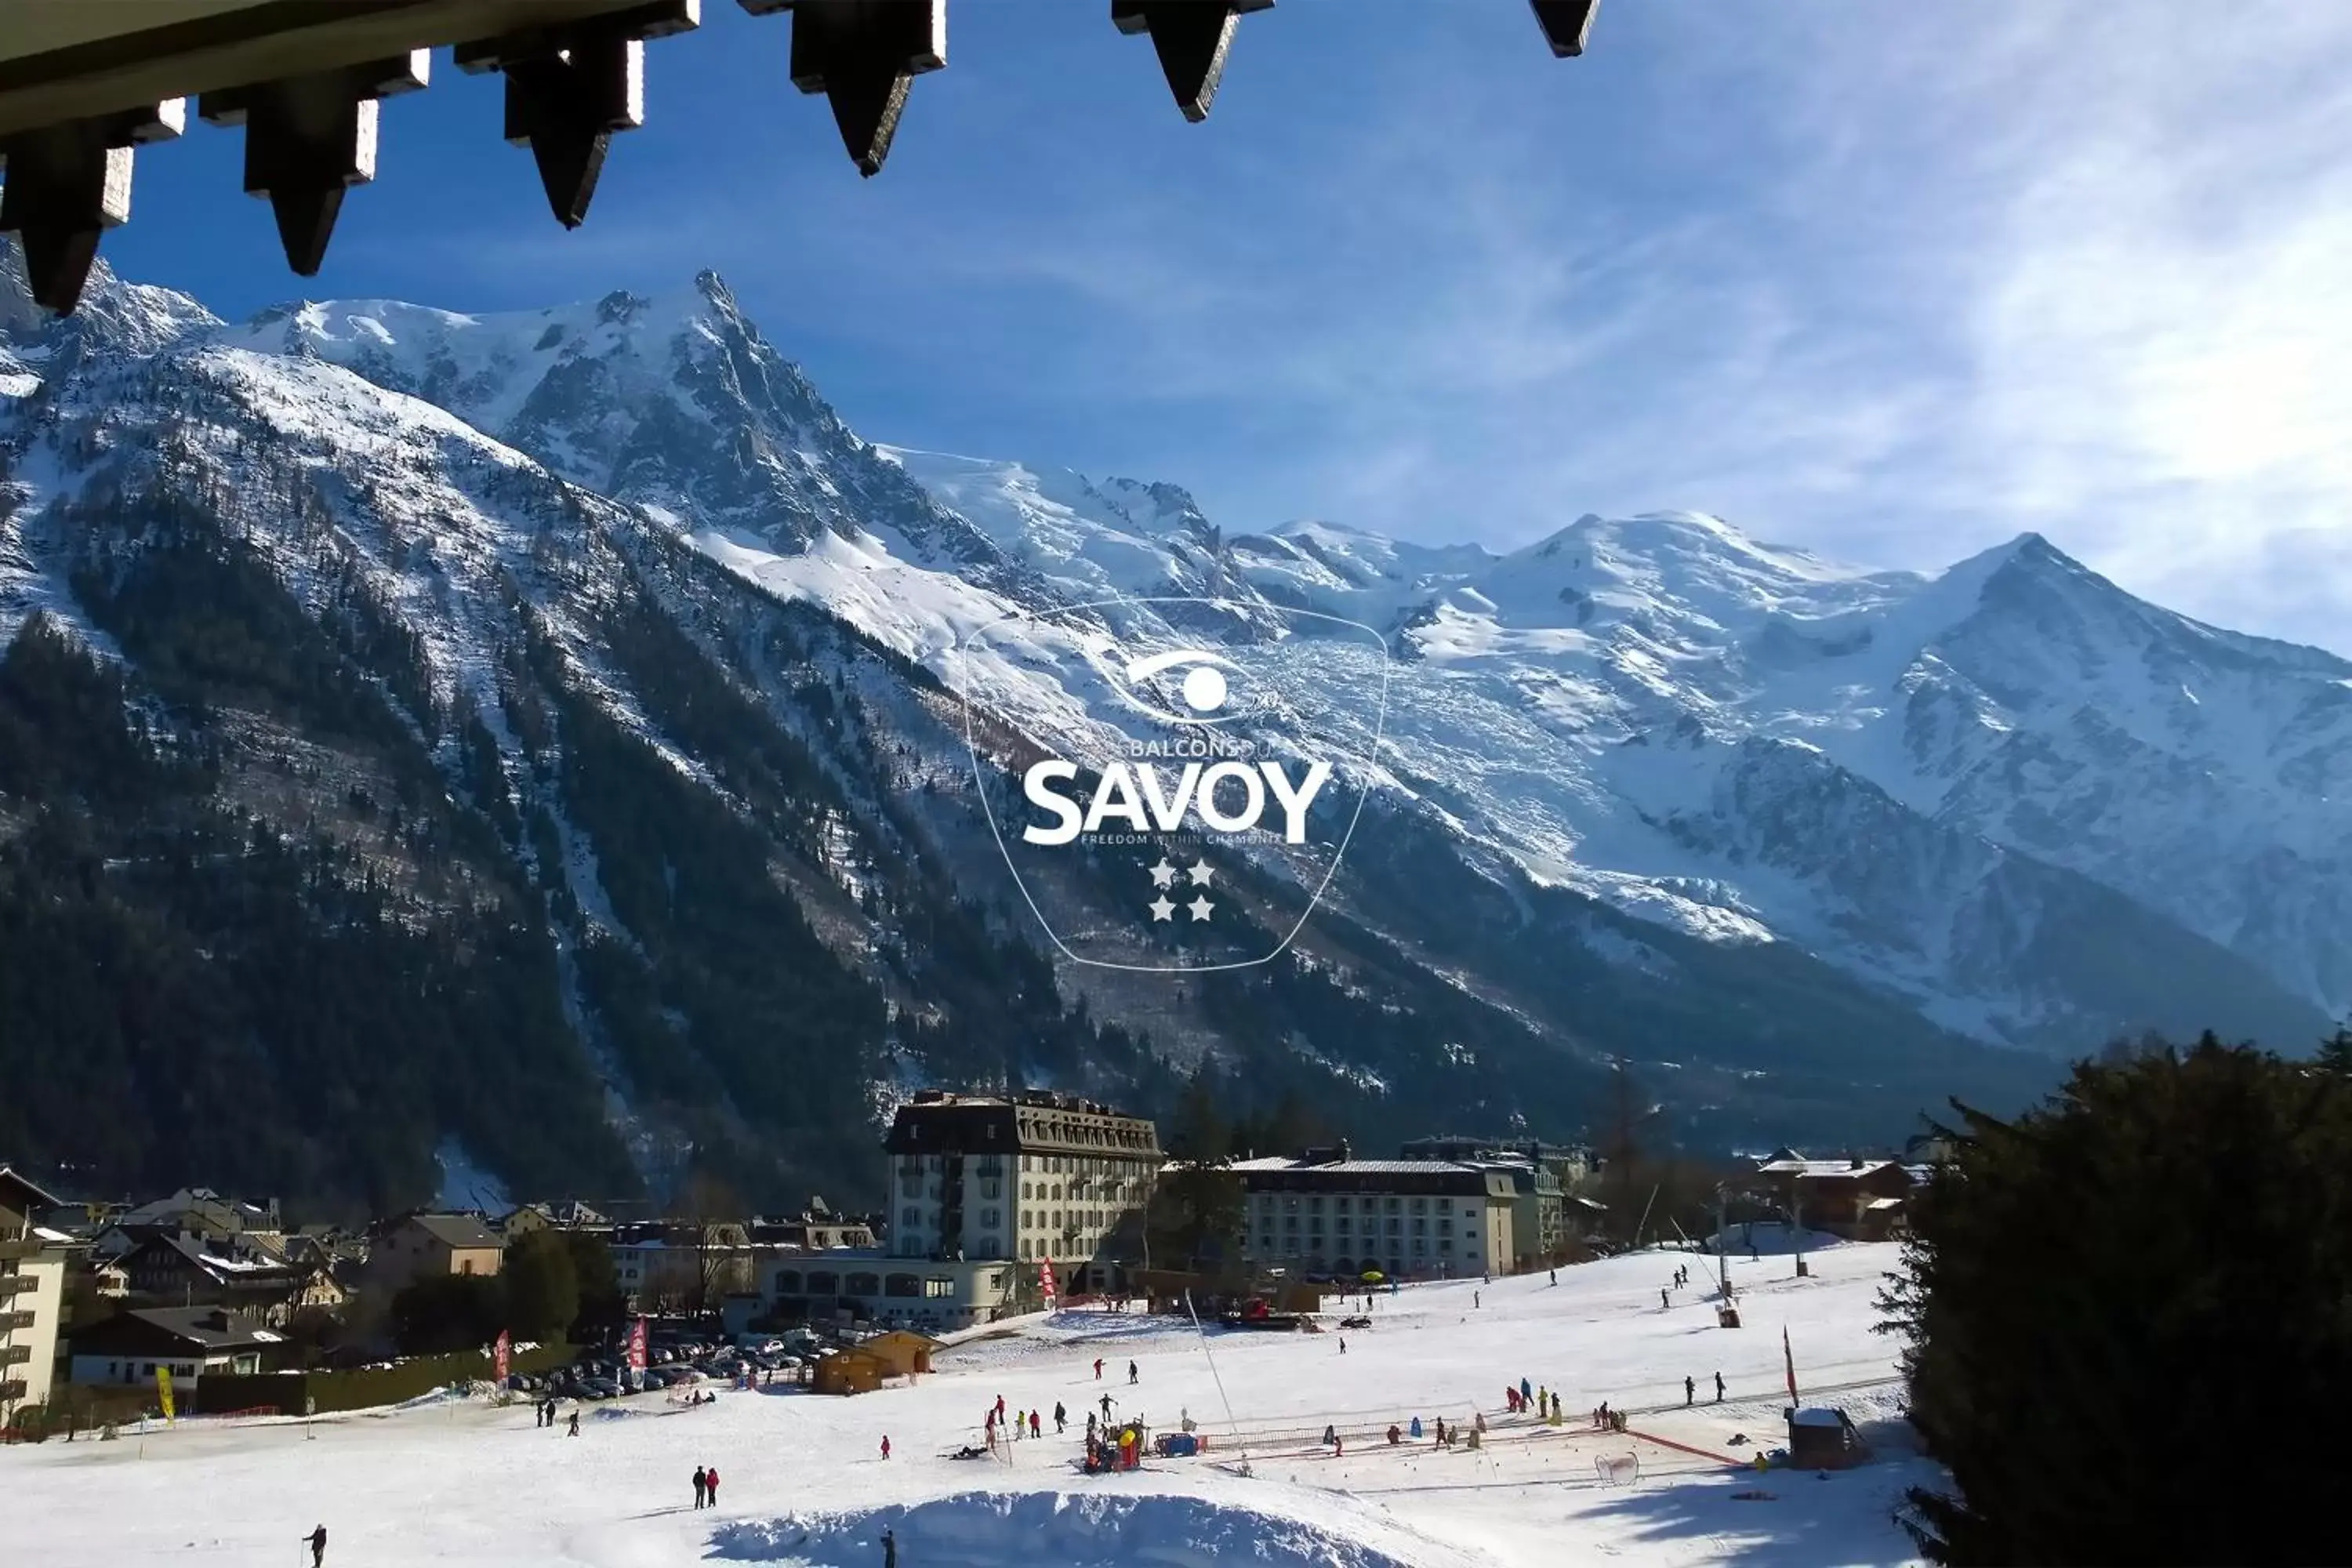 View (from property/room), Winter in Les Balcons du Savoy